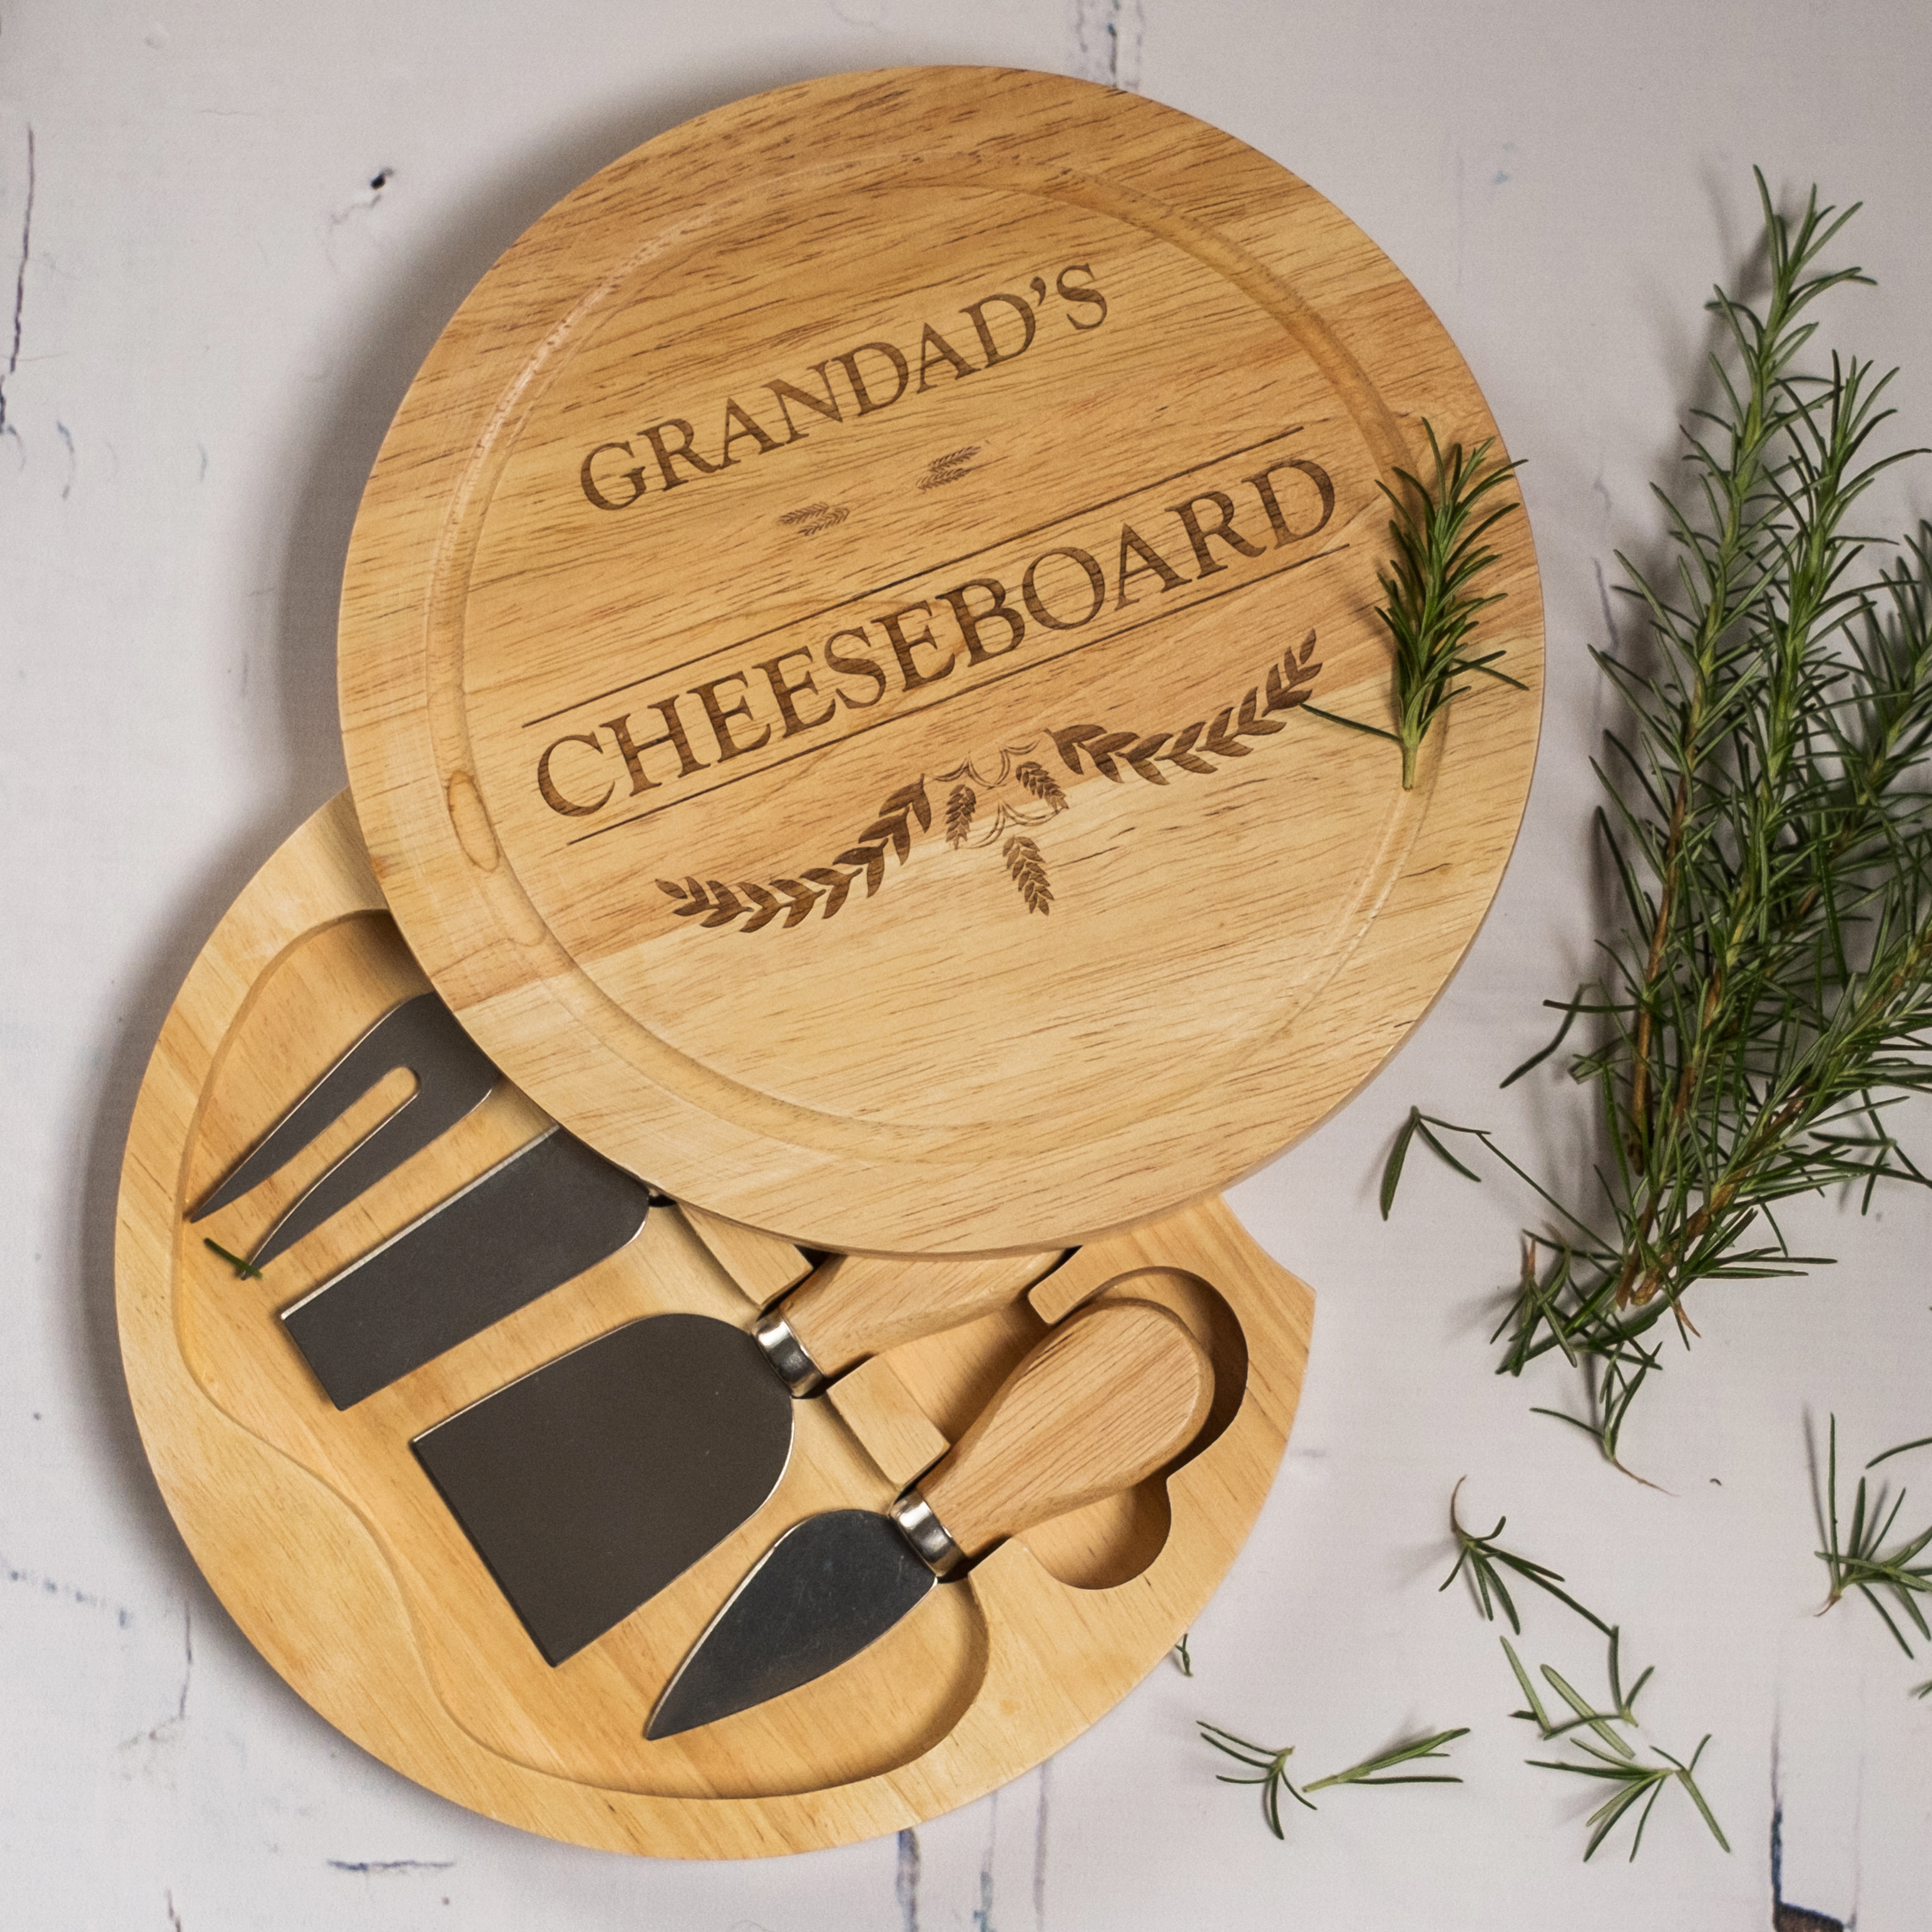 Grandads cheeseboard with knives set